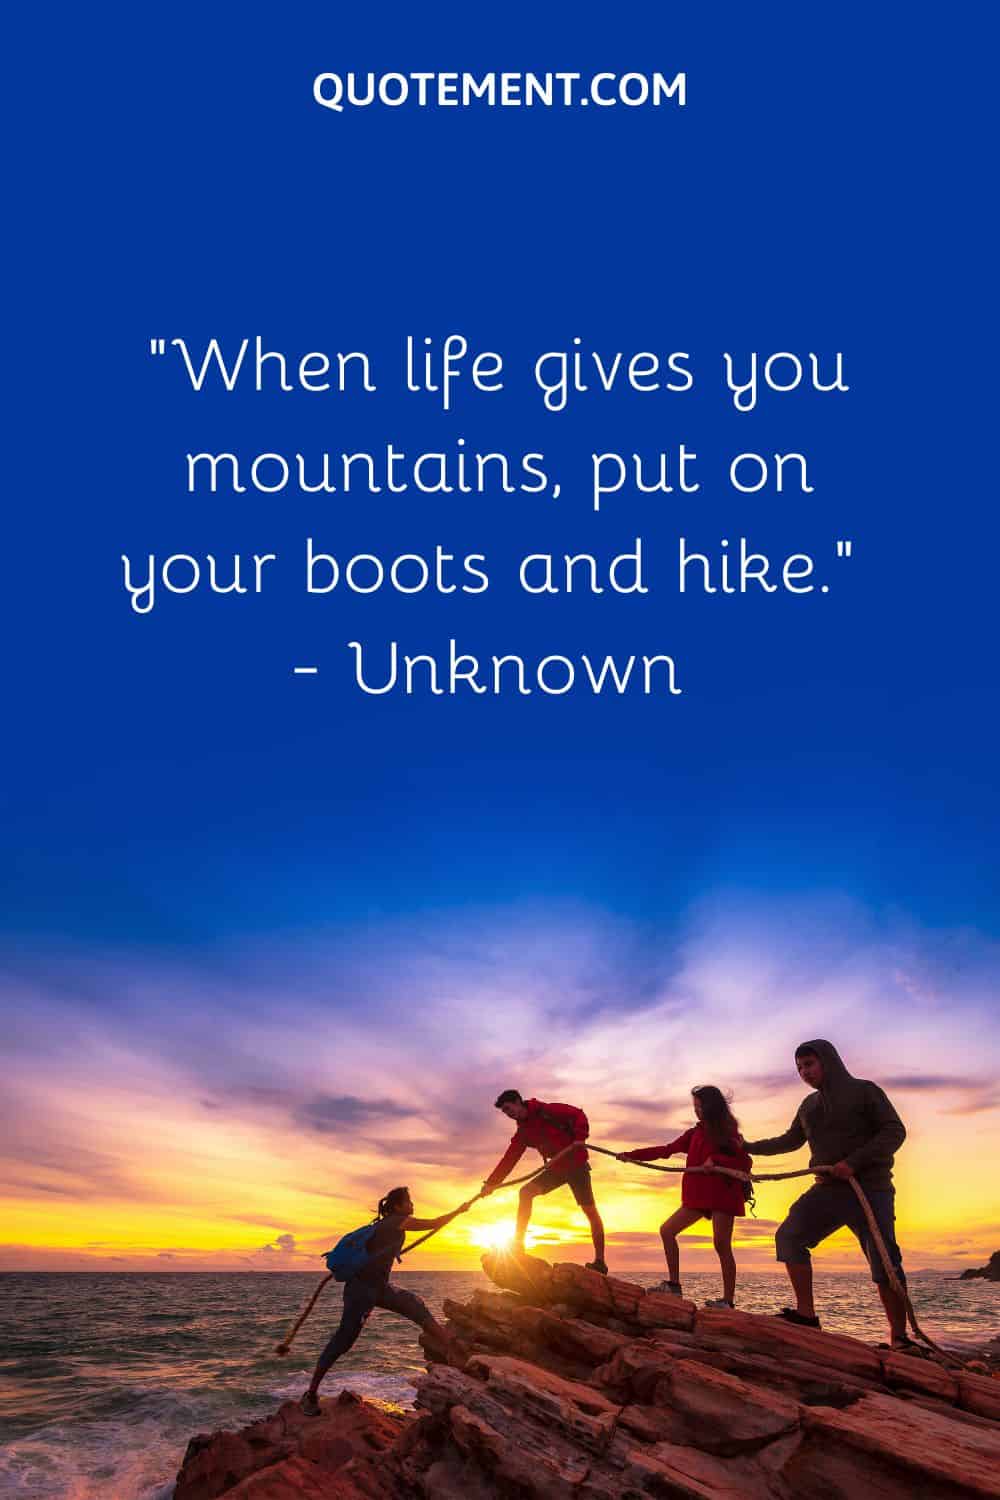 “When life gives you mountains, put on your boots and hike.” — Unknown